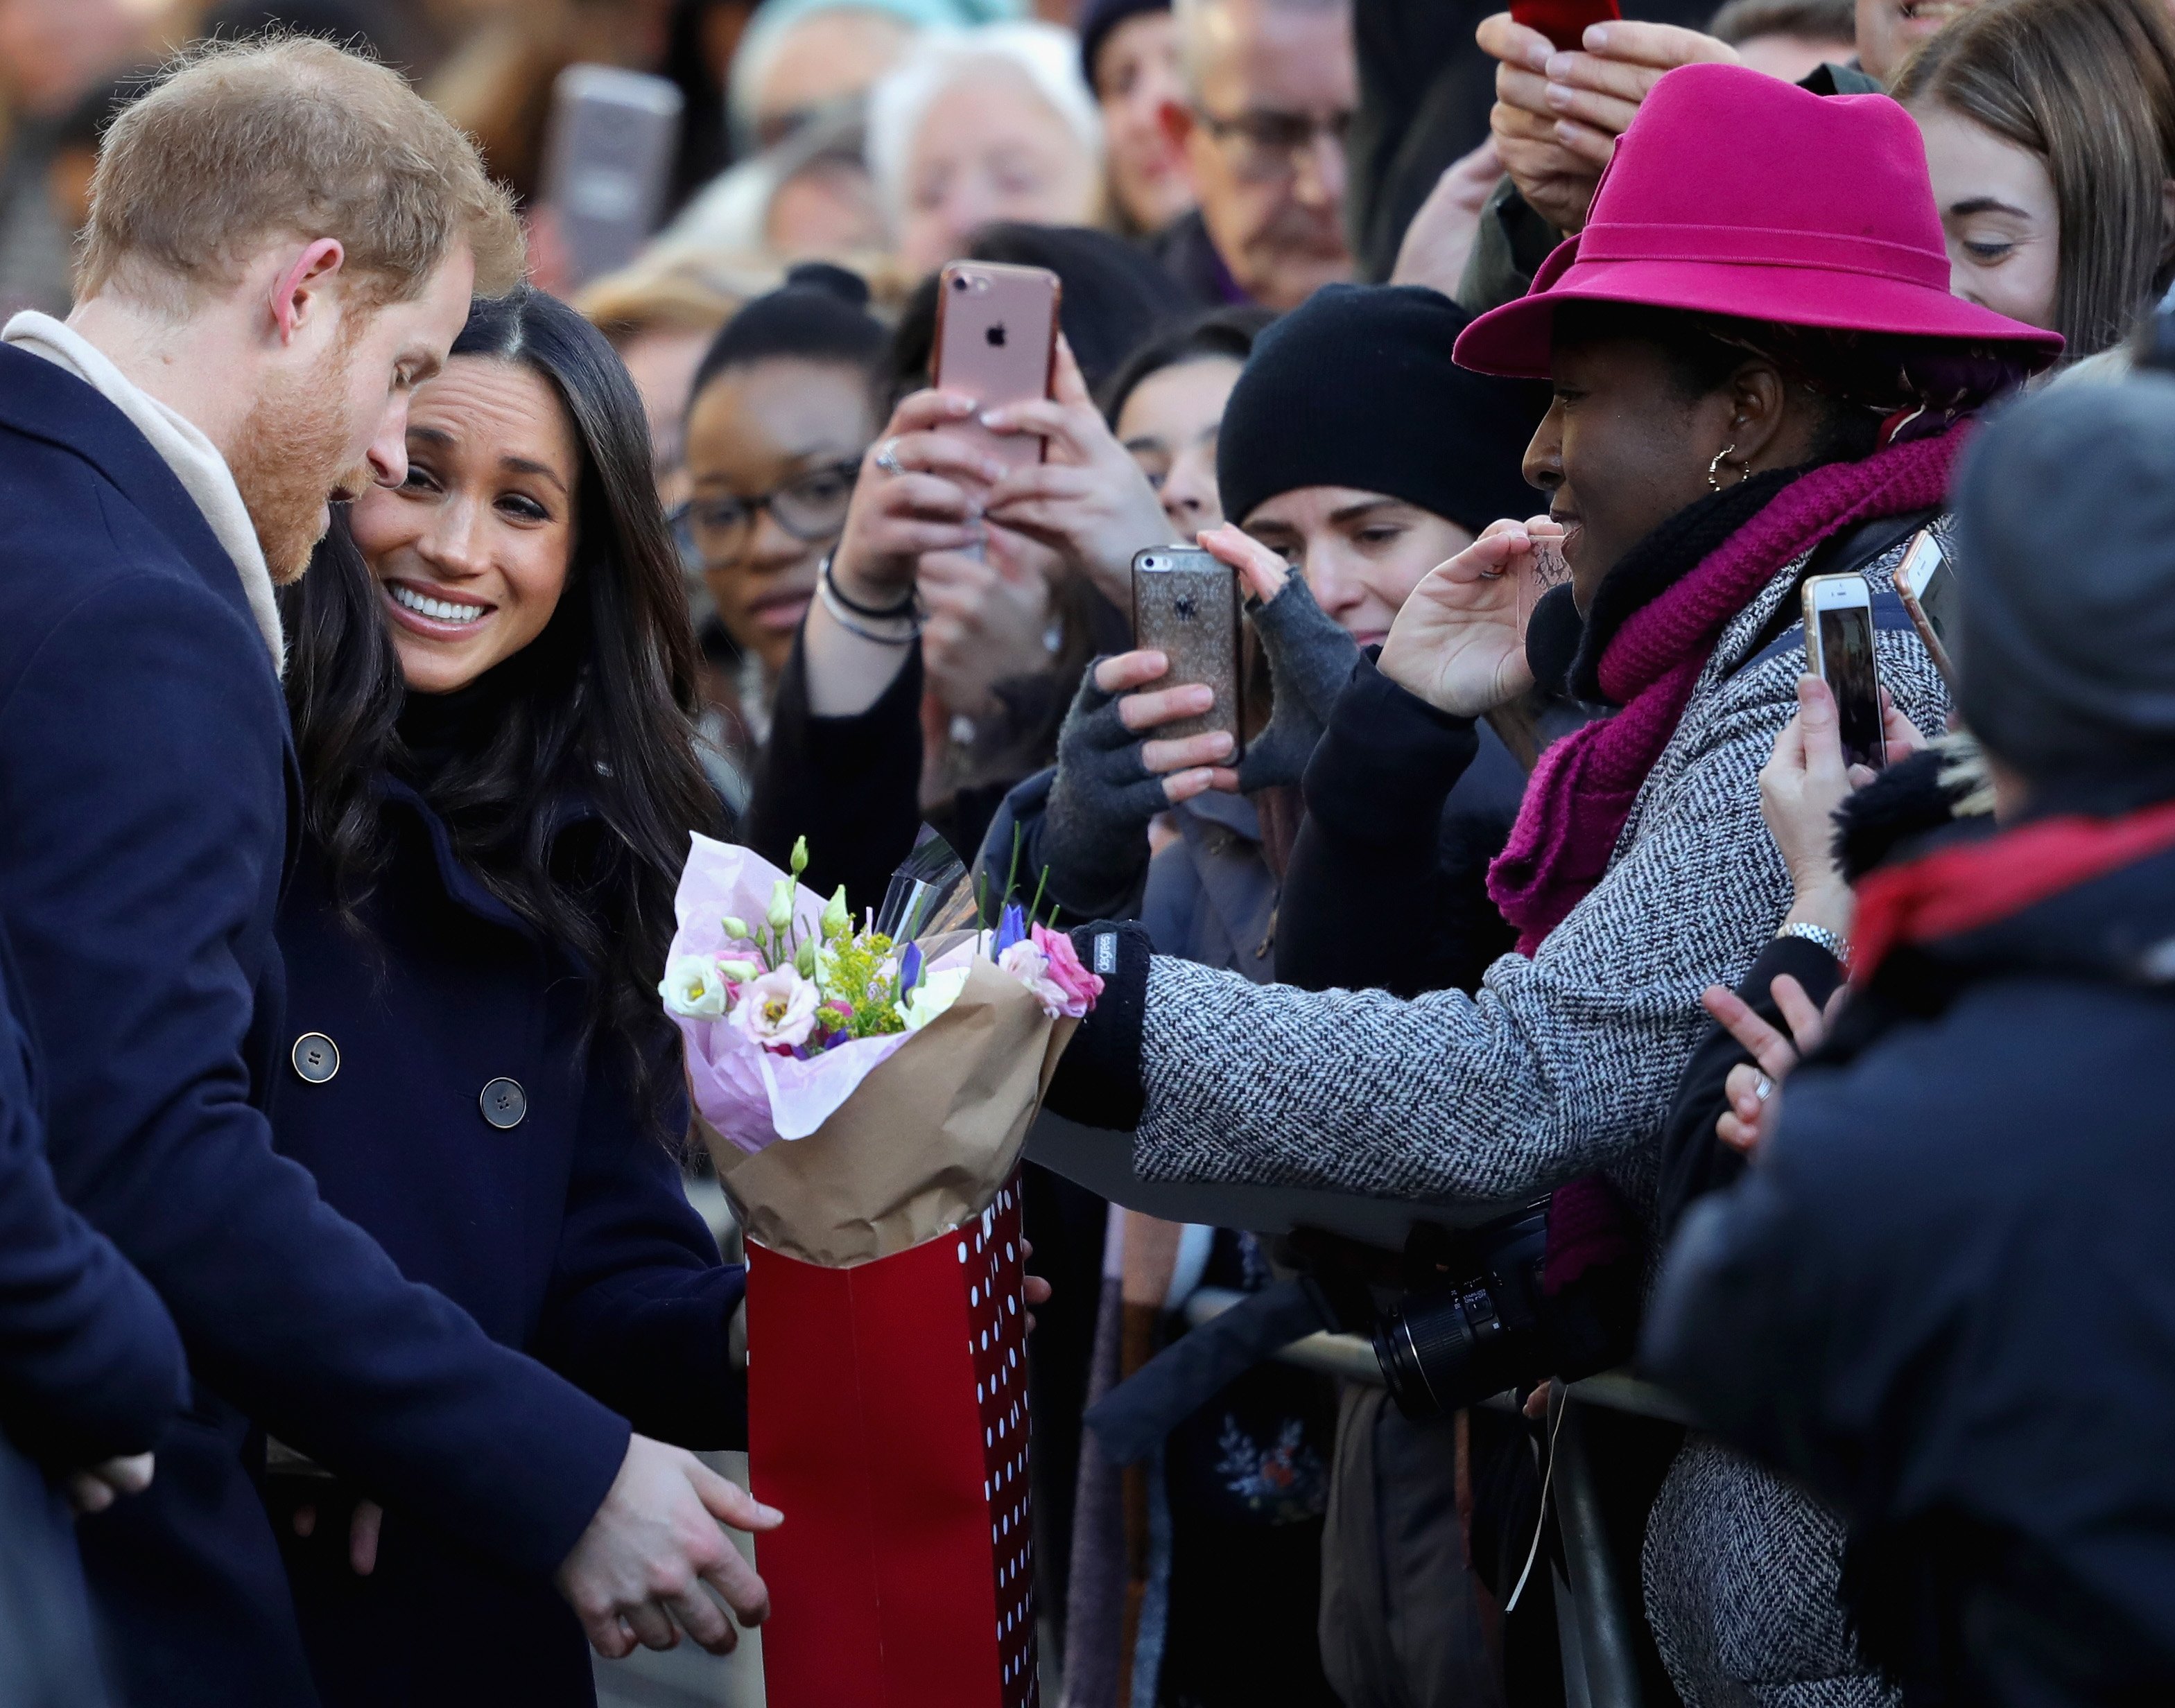 Prince Harry and Meghan Markle interacting with people on December 1, 2017 in Nottingham, England. | Source: Getty Images 